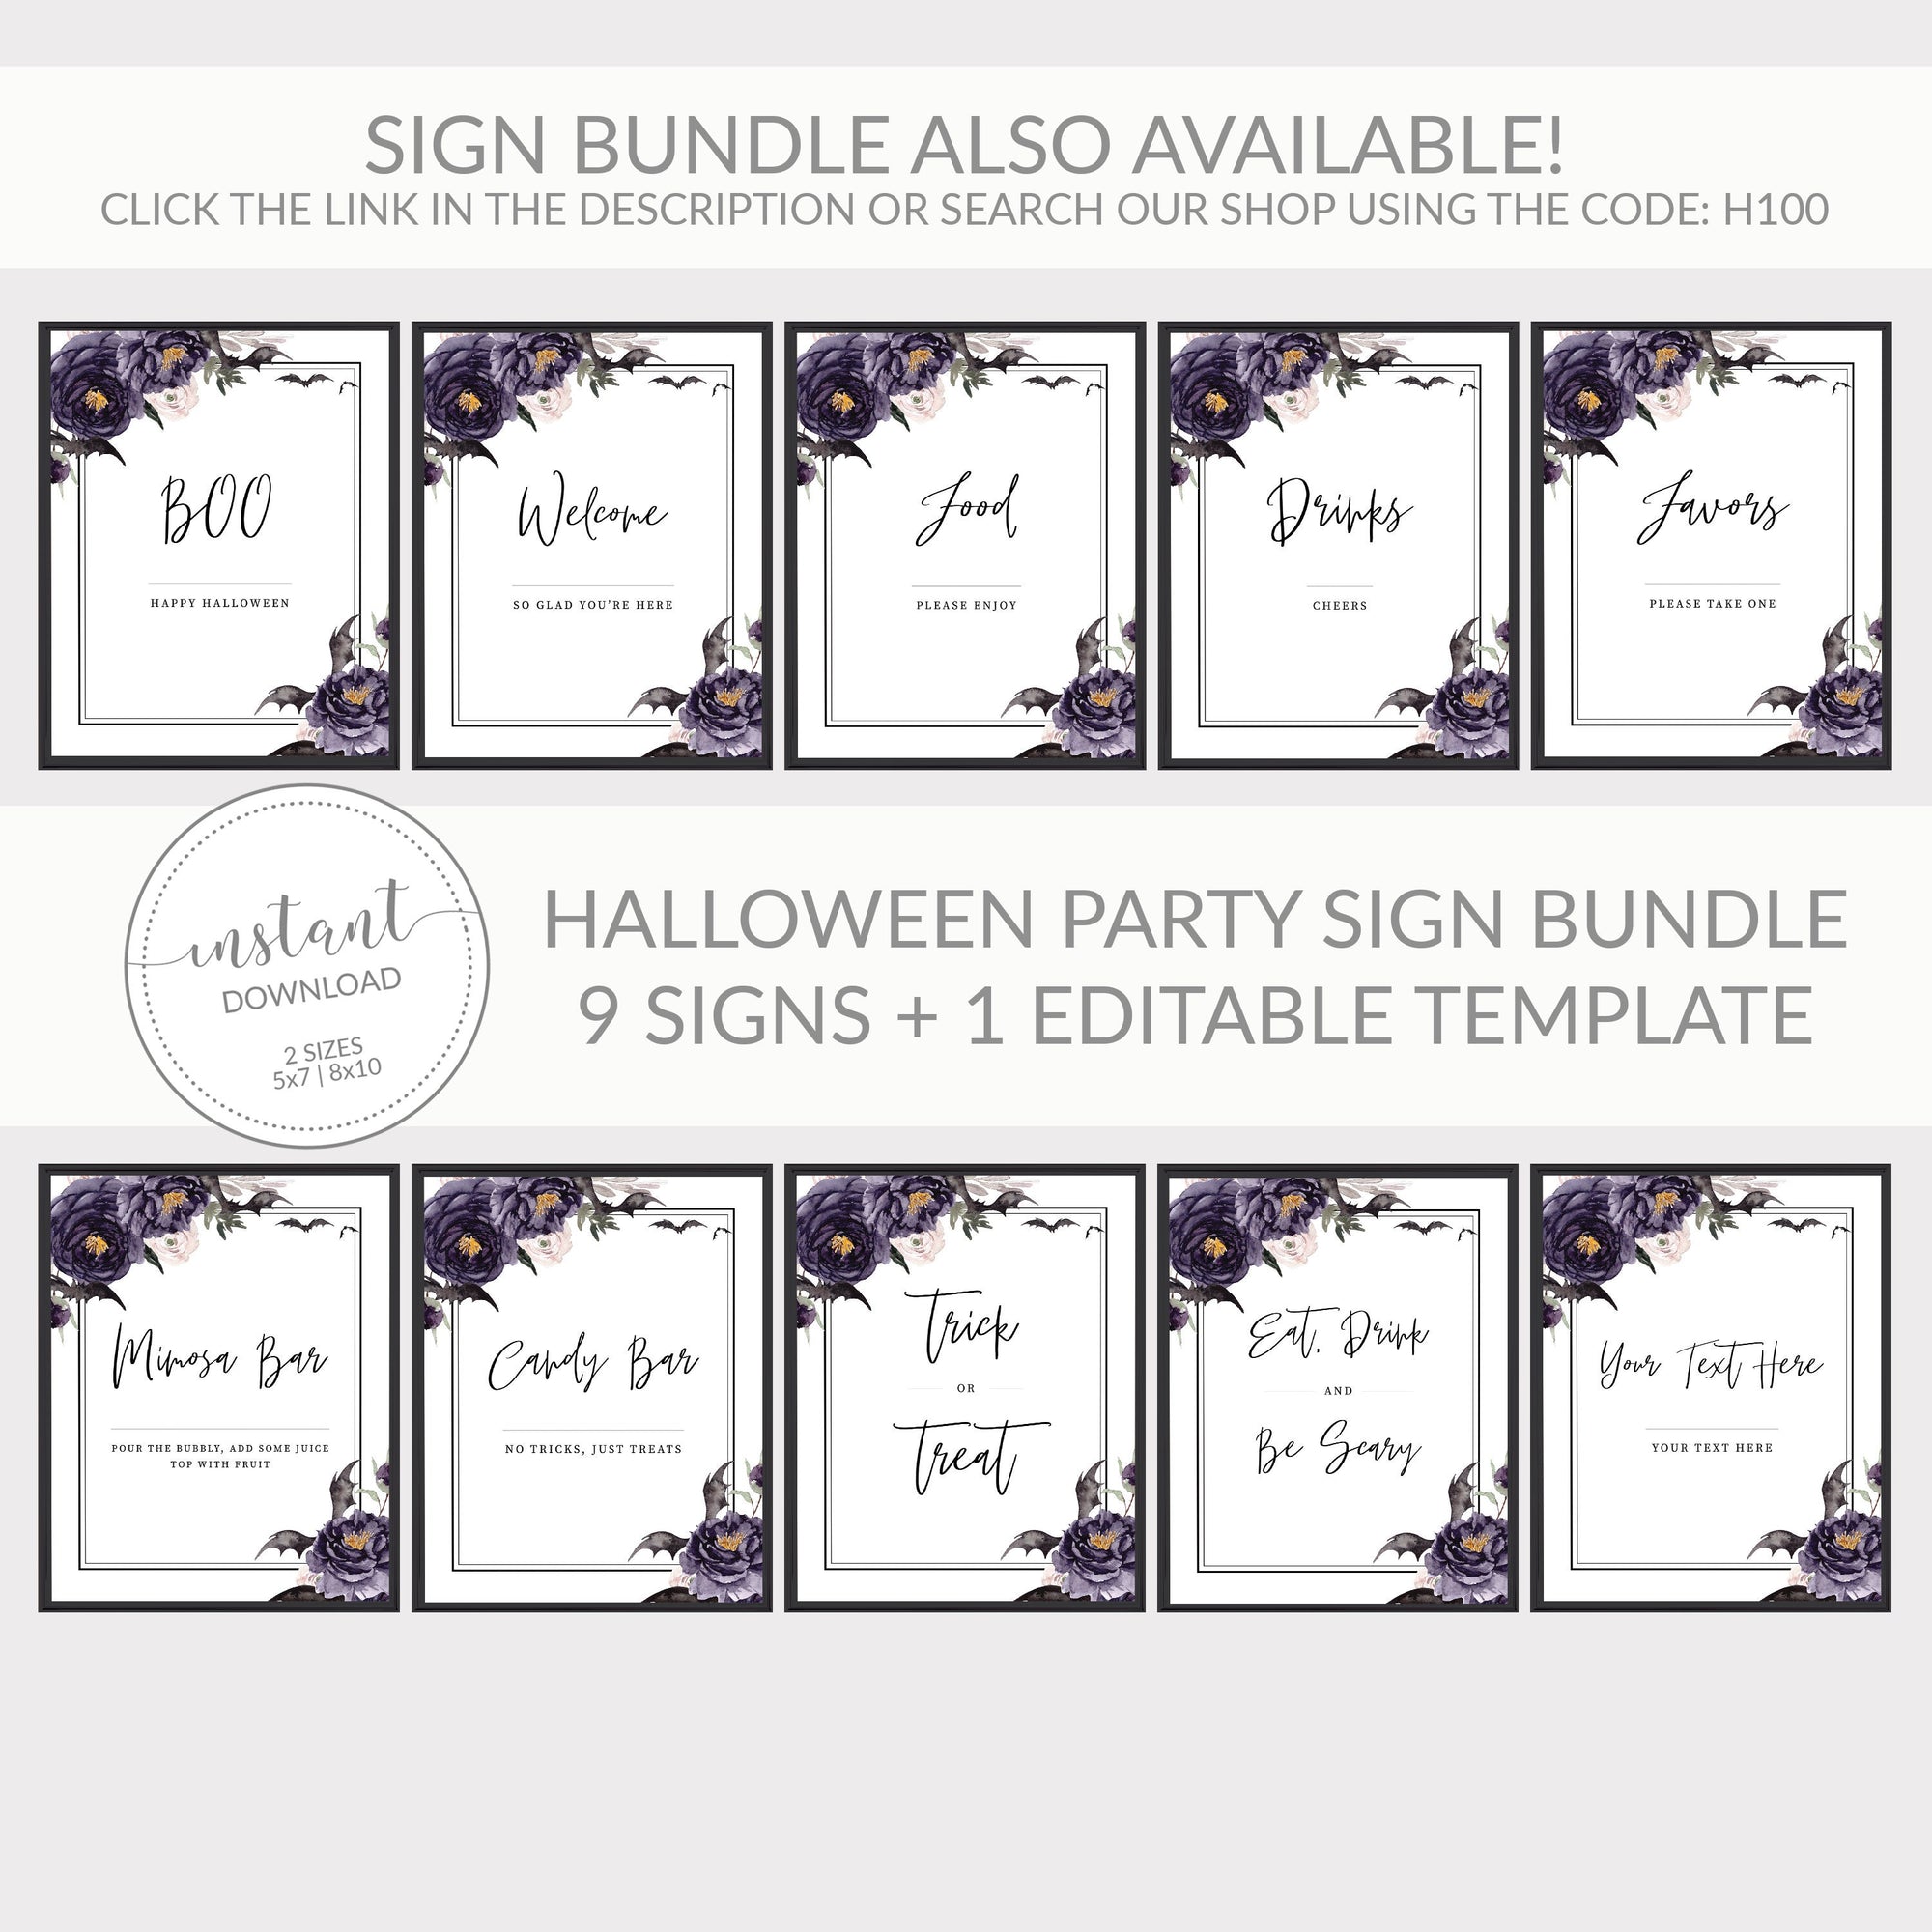 Halloween Party Food Sign, Halloween Printables, Halloween Party Decorations, Halloween Birthday Party Decor, INSTANT DOWNLOAD - H100